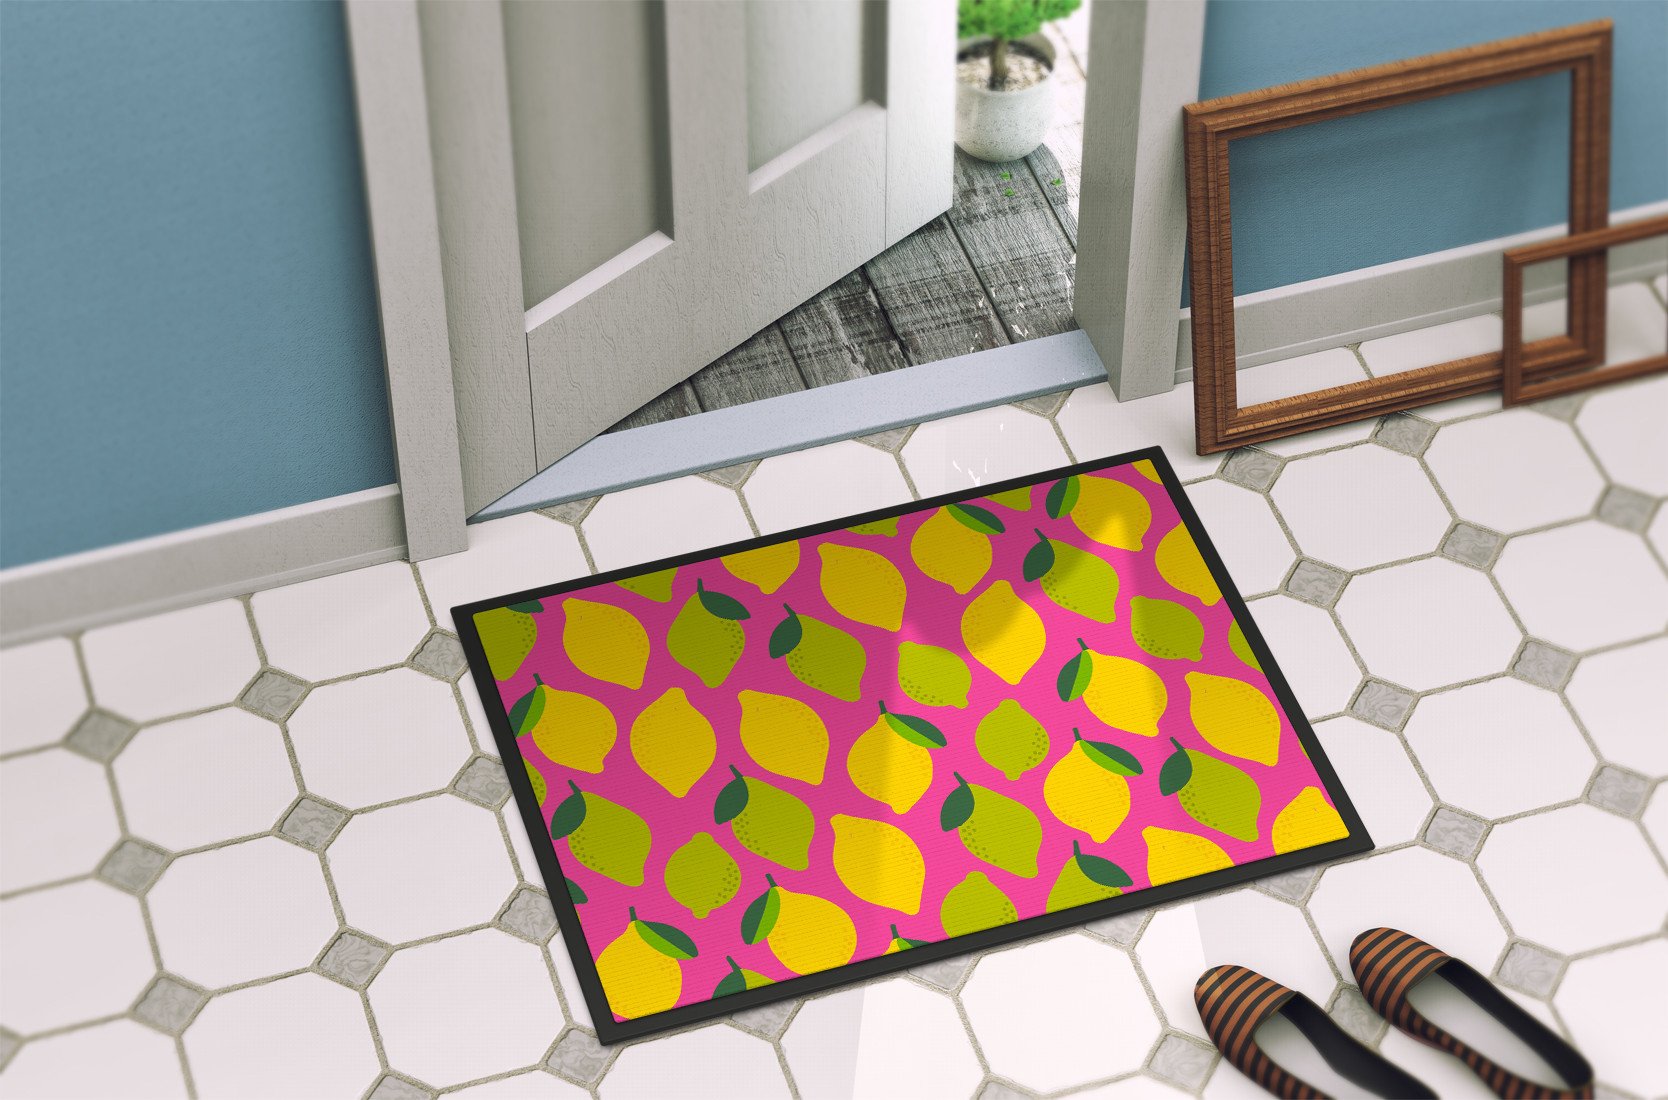 Lemons and Limes on Pink Indoor or Outdoor Mat 24x36 BB5143JMAT by Caroline's Treasures